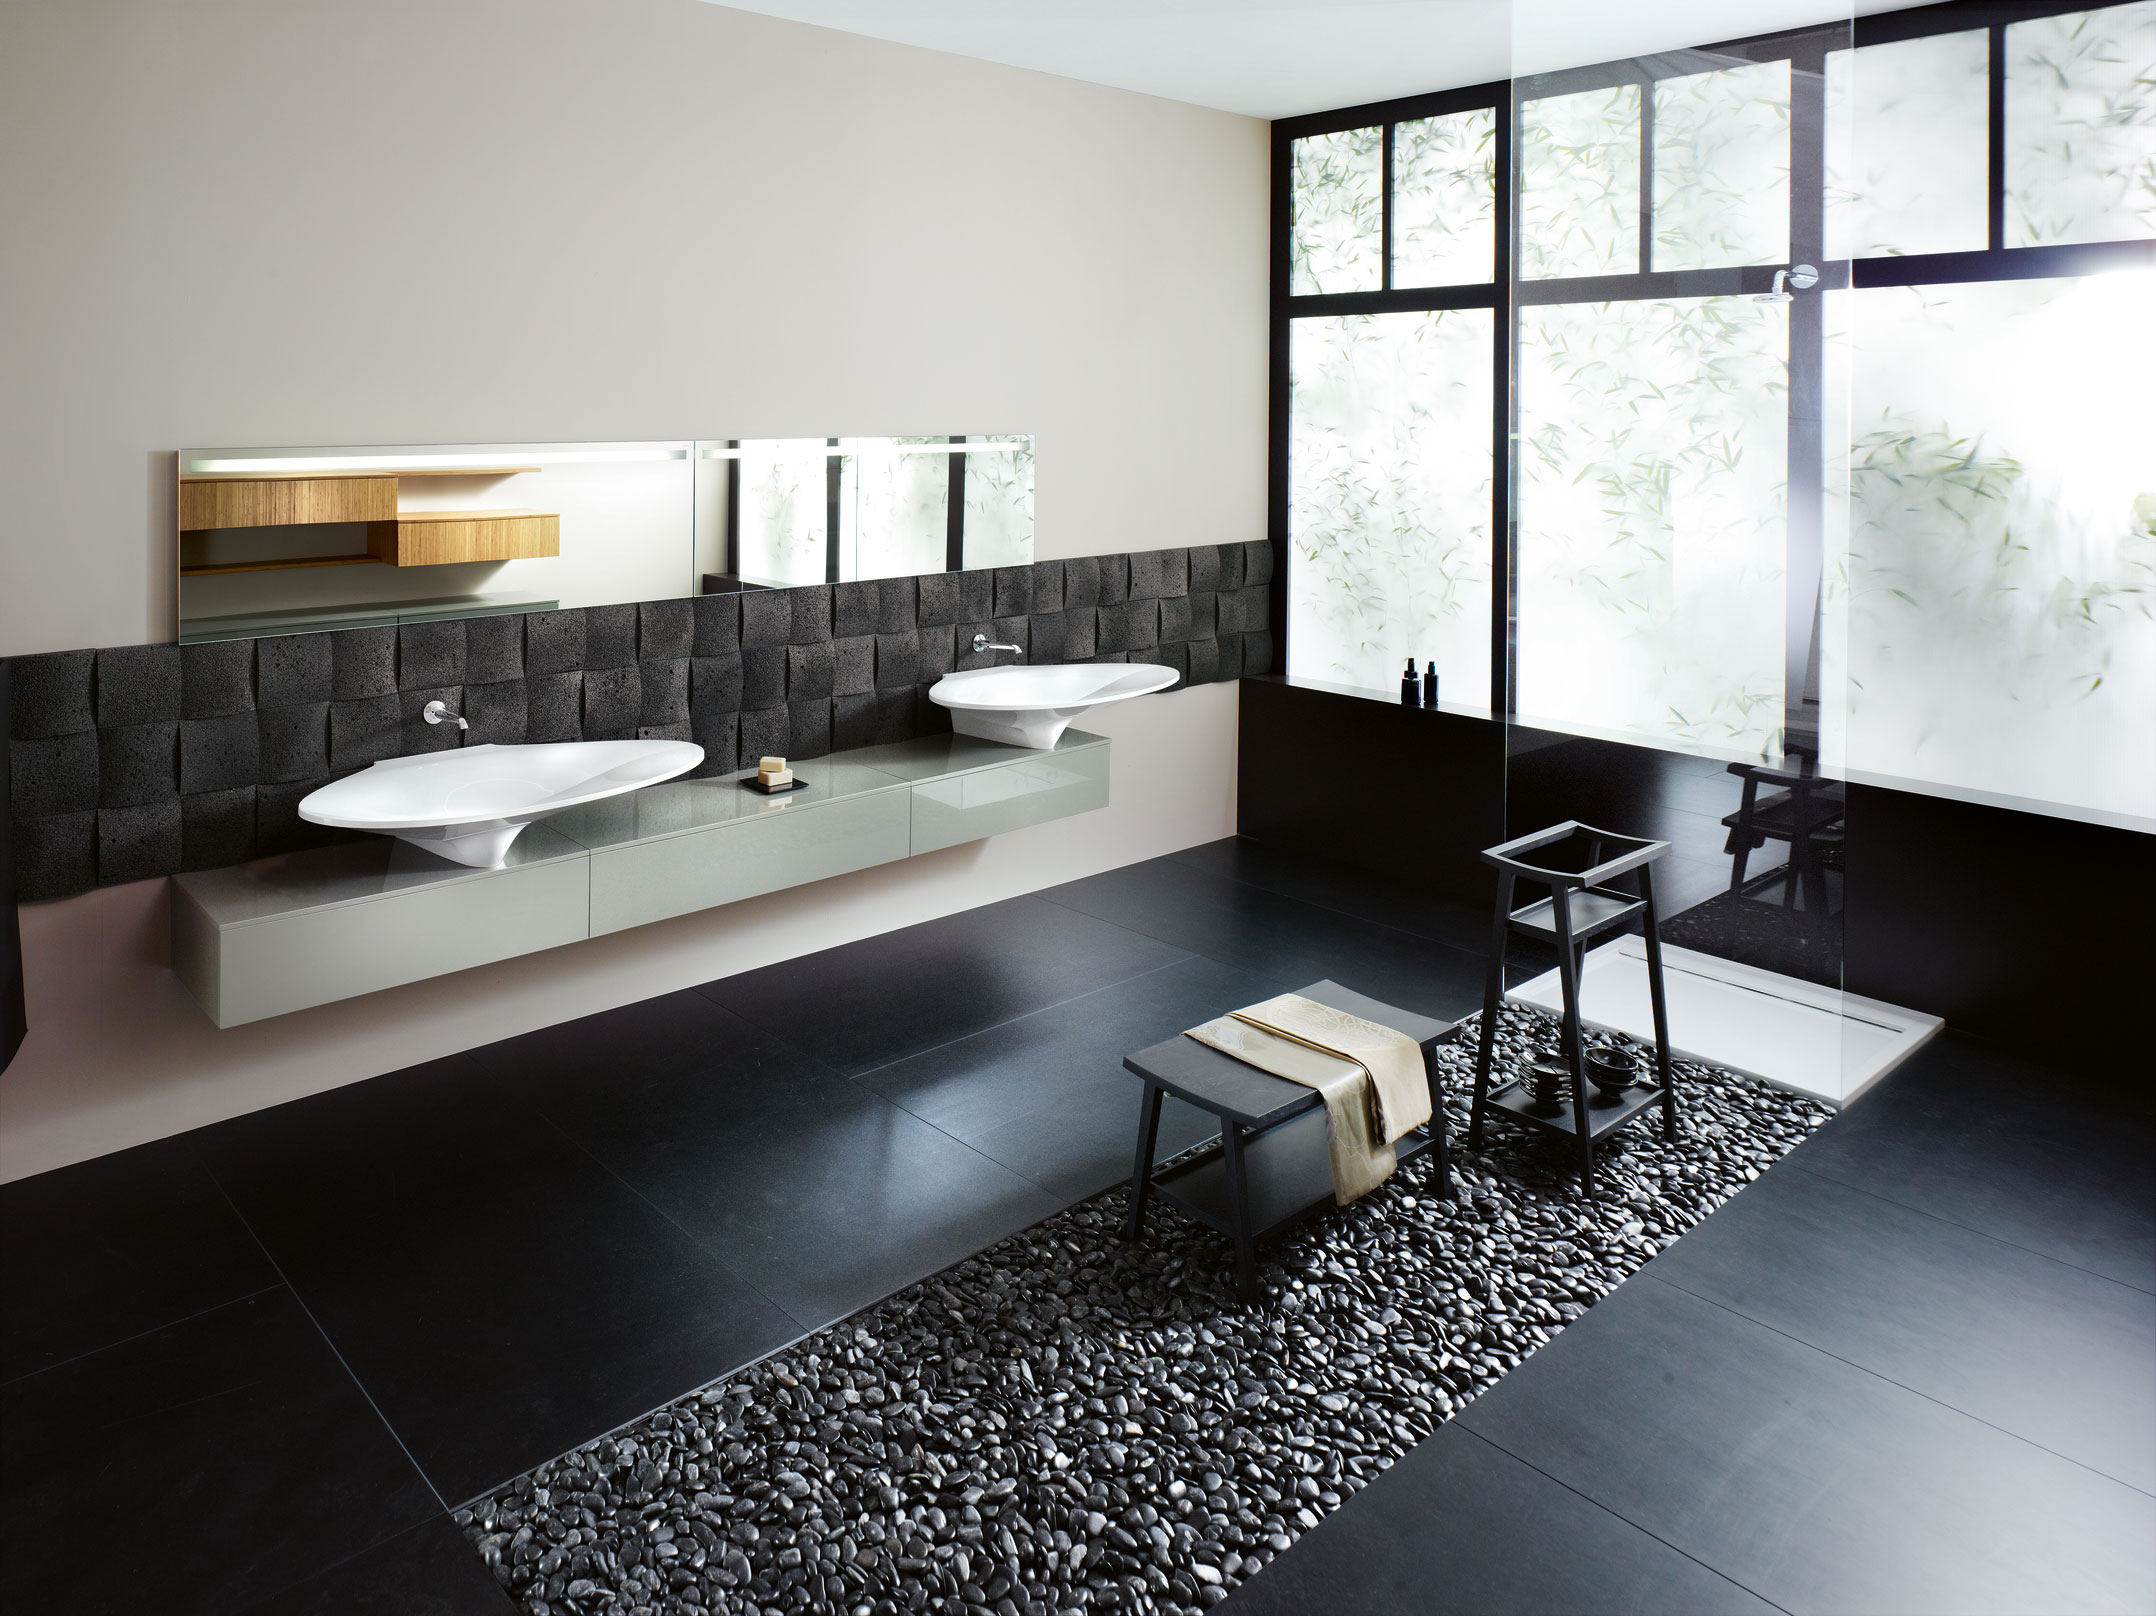 Large bathroom black flooring and modern basin design with mirrors.